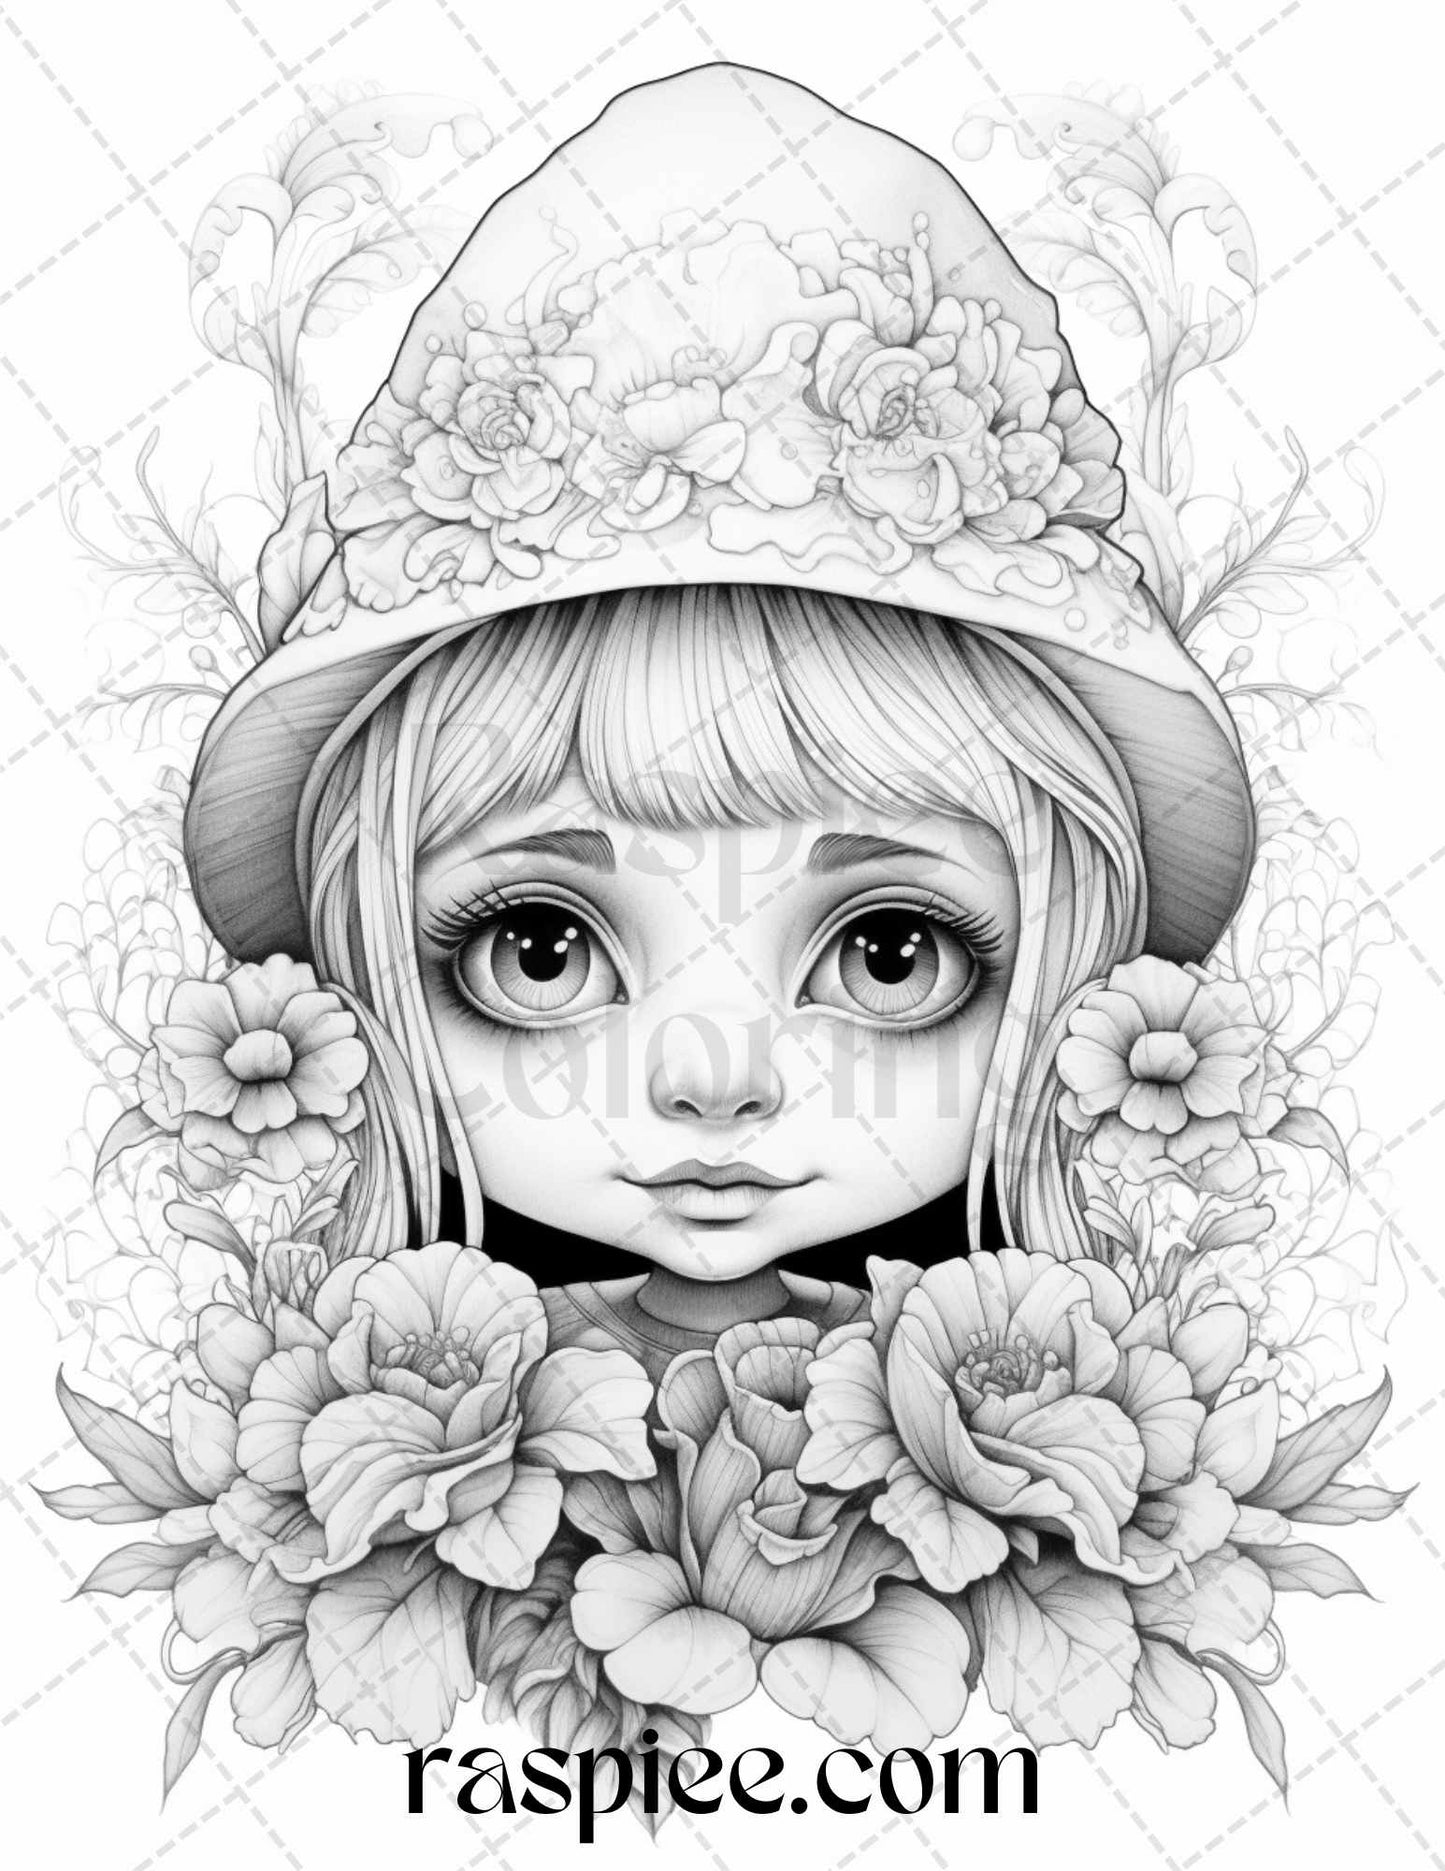 Flower Gnomes Grayscale Coloring Pages, Printable Coloring Pages for Adults and Kids, Flower Gnome Art, Relaxing and Fun Coloring Book